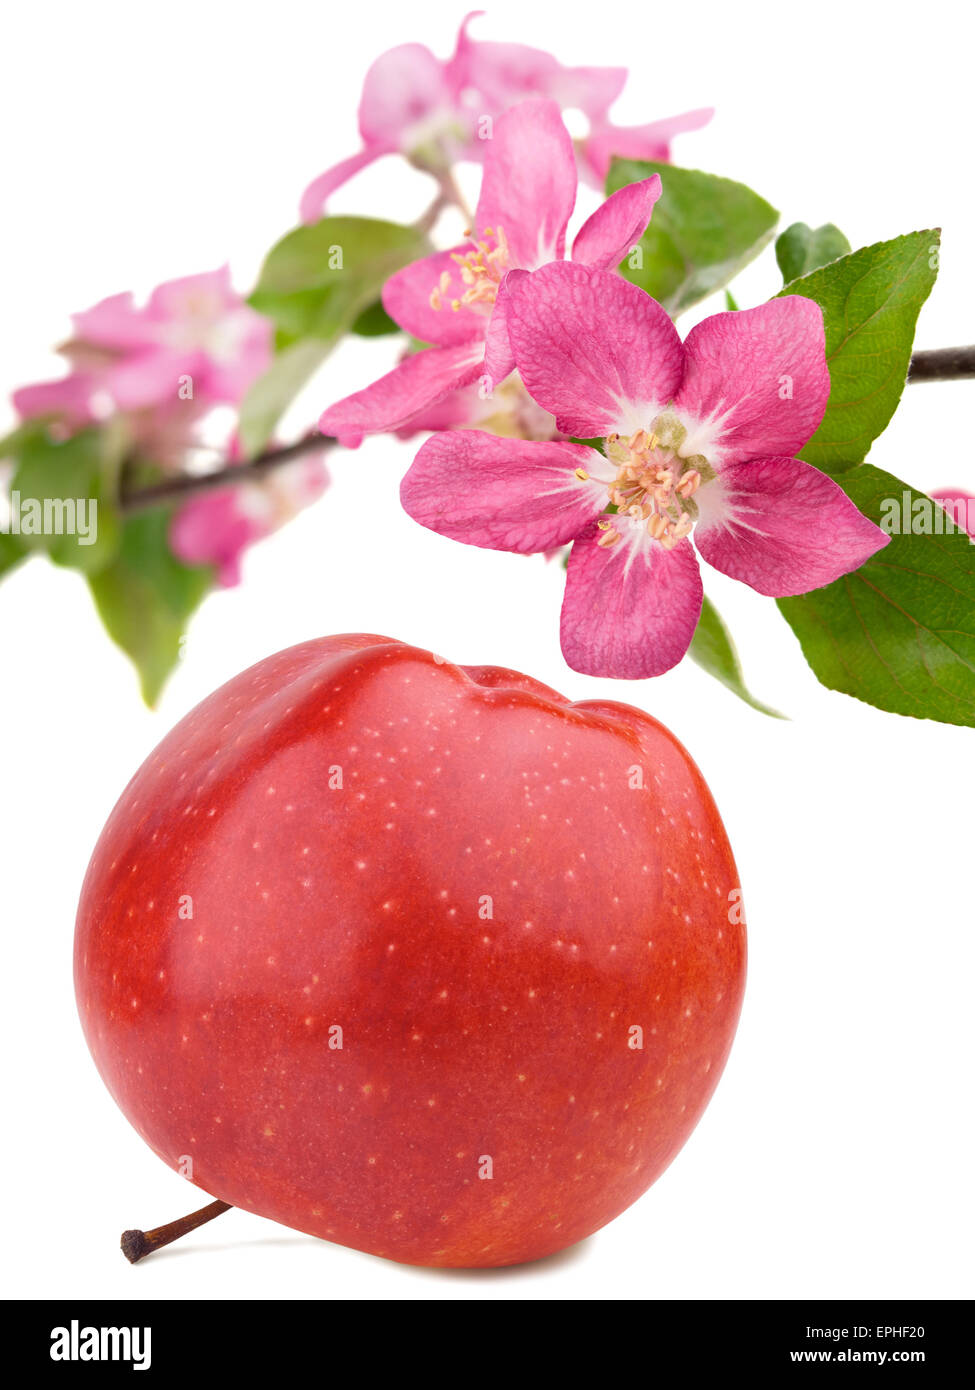 Red apple and branch of flowers above. Stock Photo